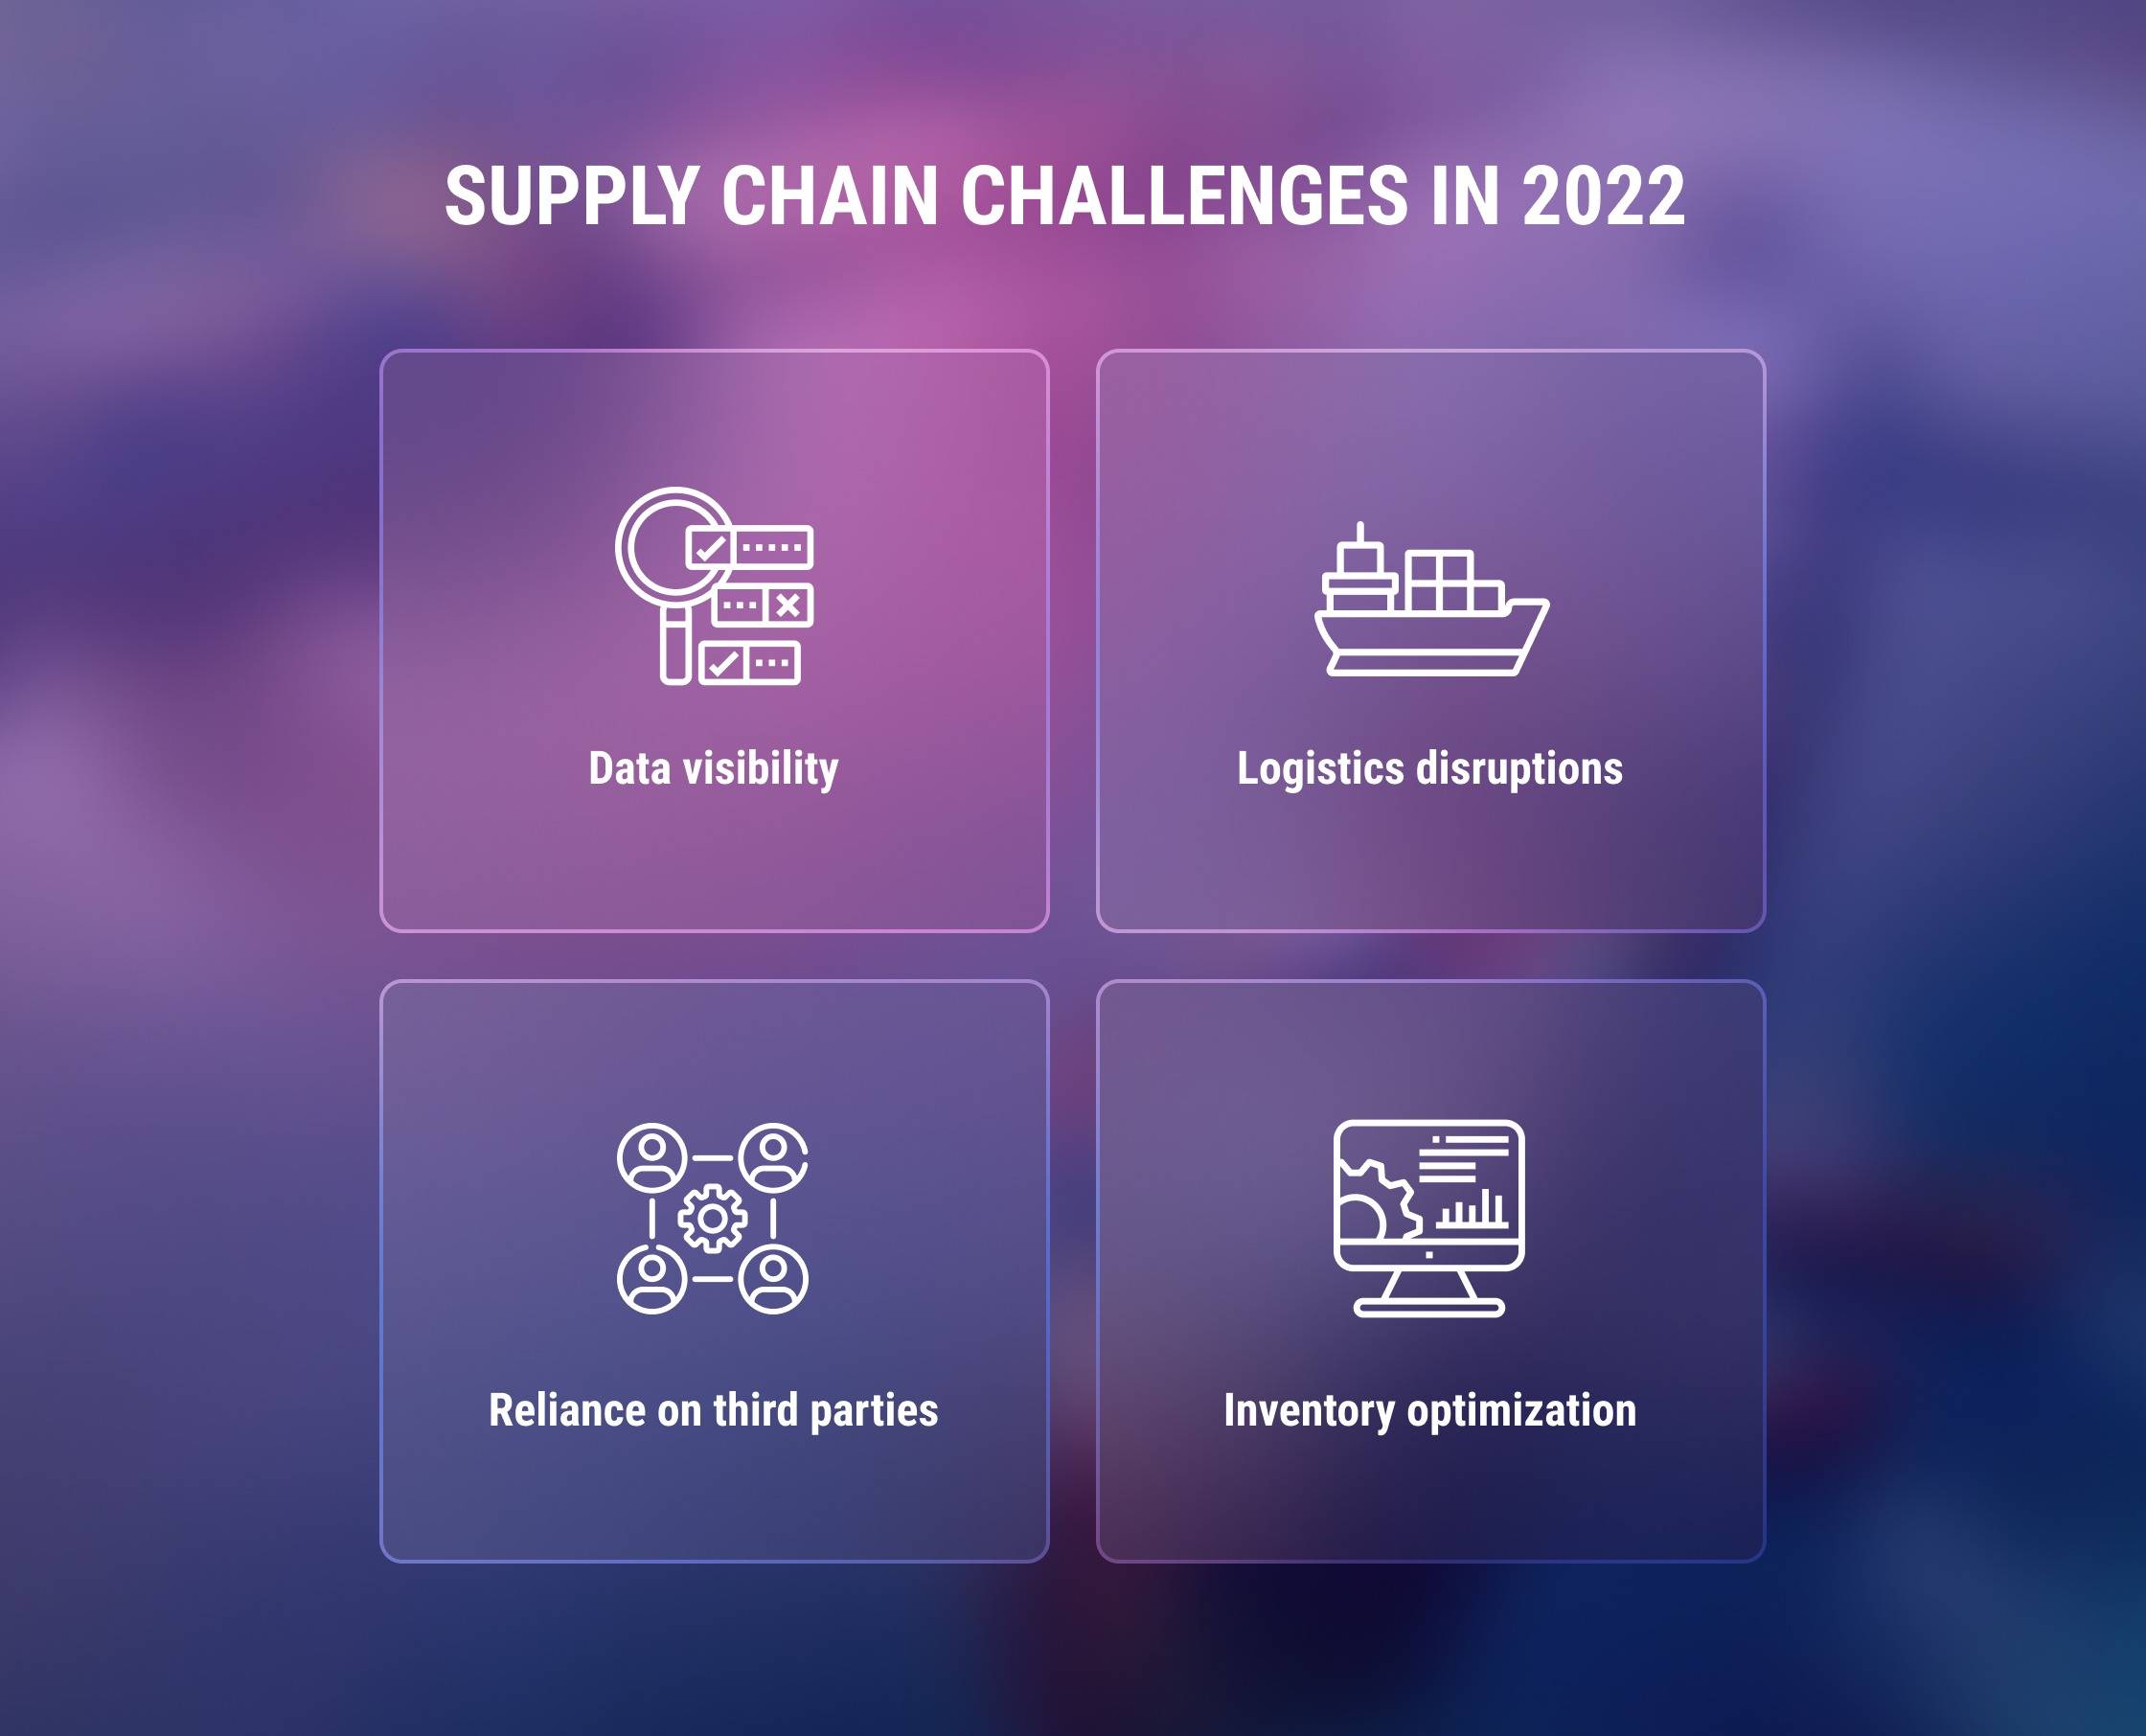 How To Make Your Supply Chain More Resilient Leverx News 5788